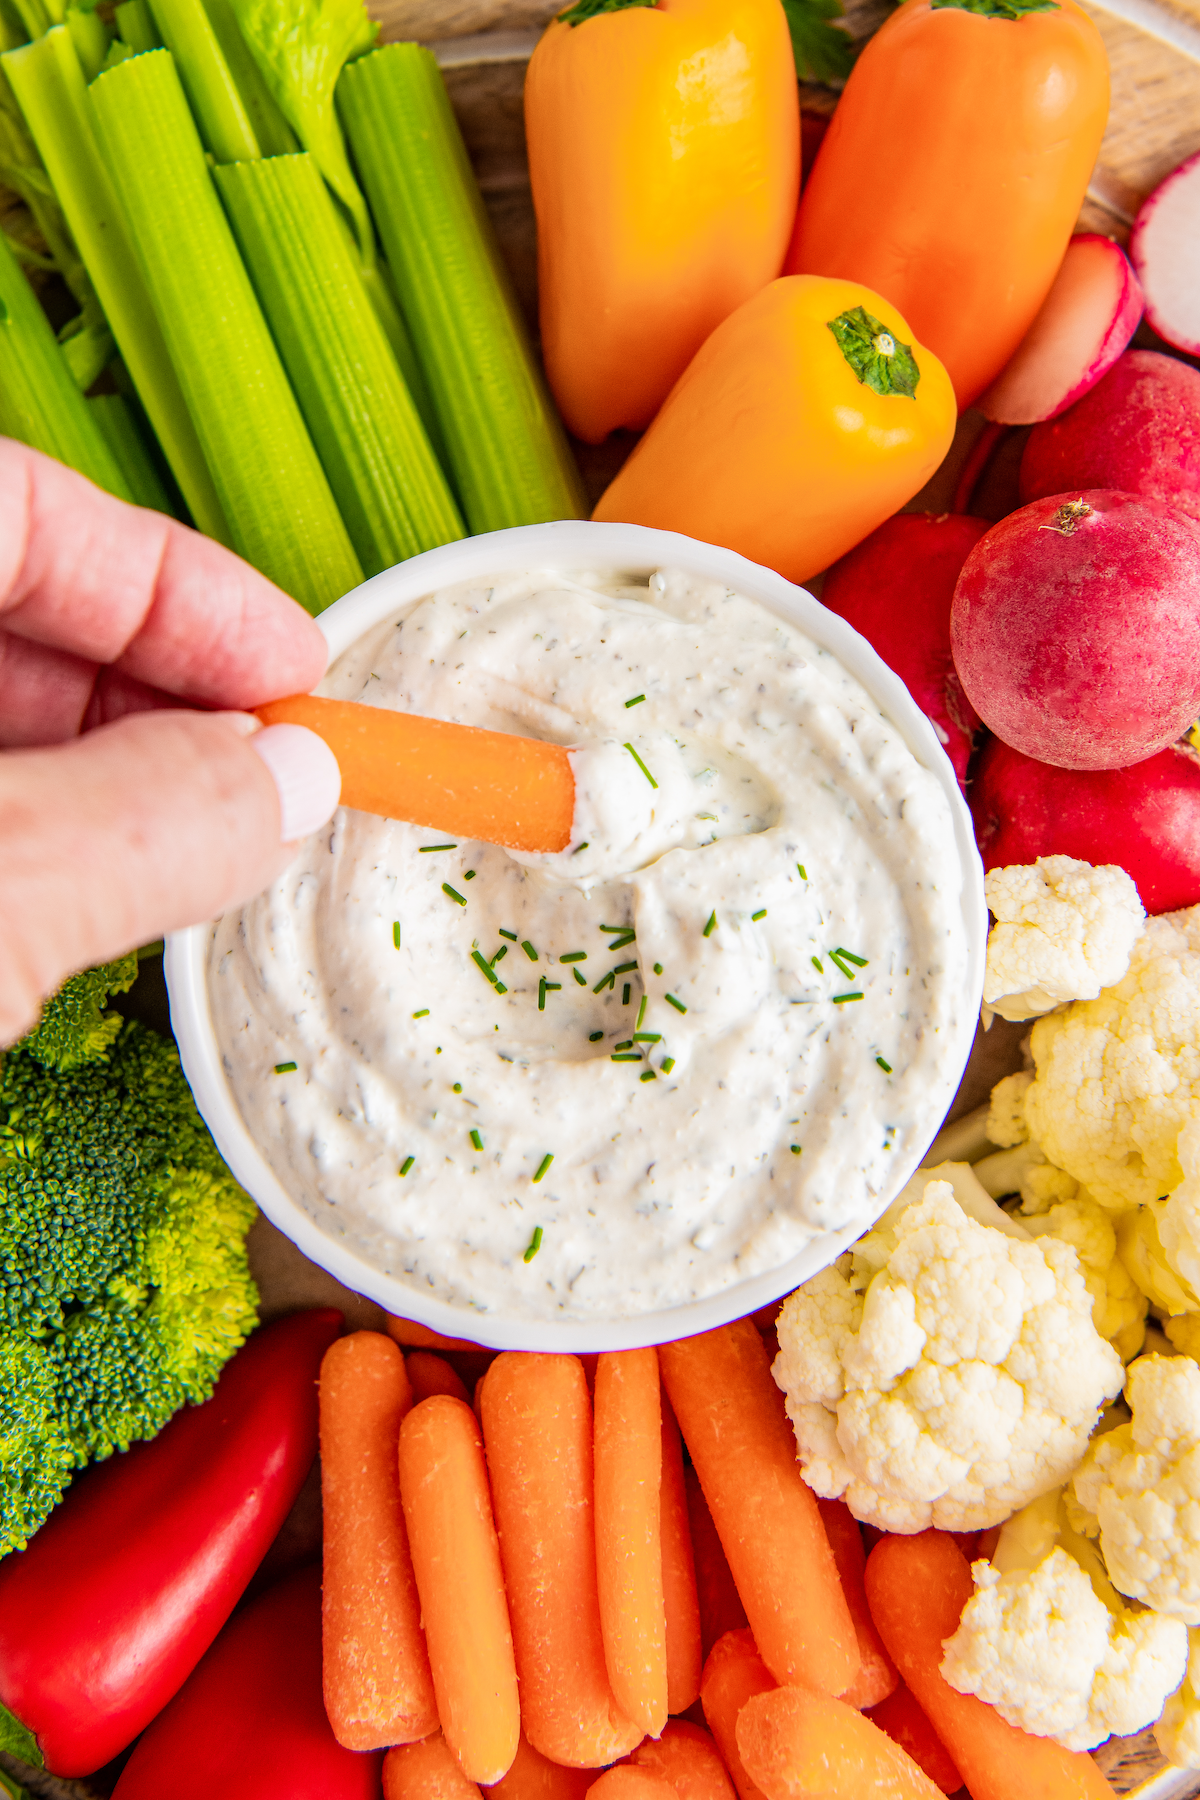 A baby carrot being dipped into a bowl of ranch surrounded by carrots, celery, broccoli, cauliflower, and radishes